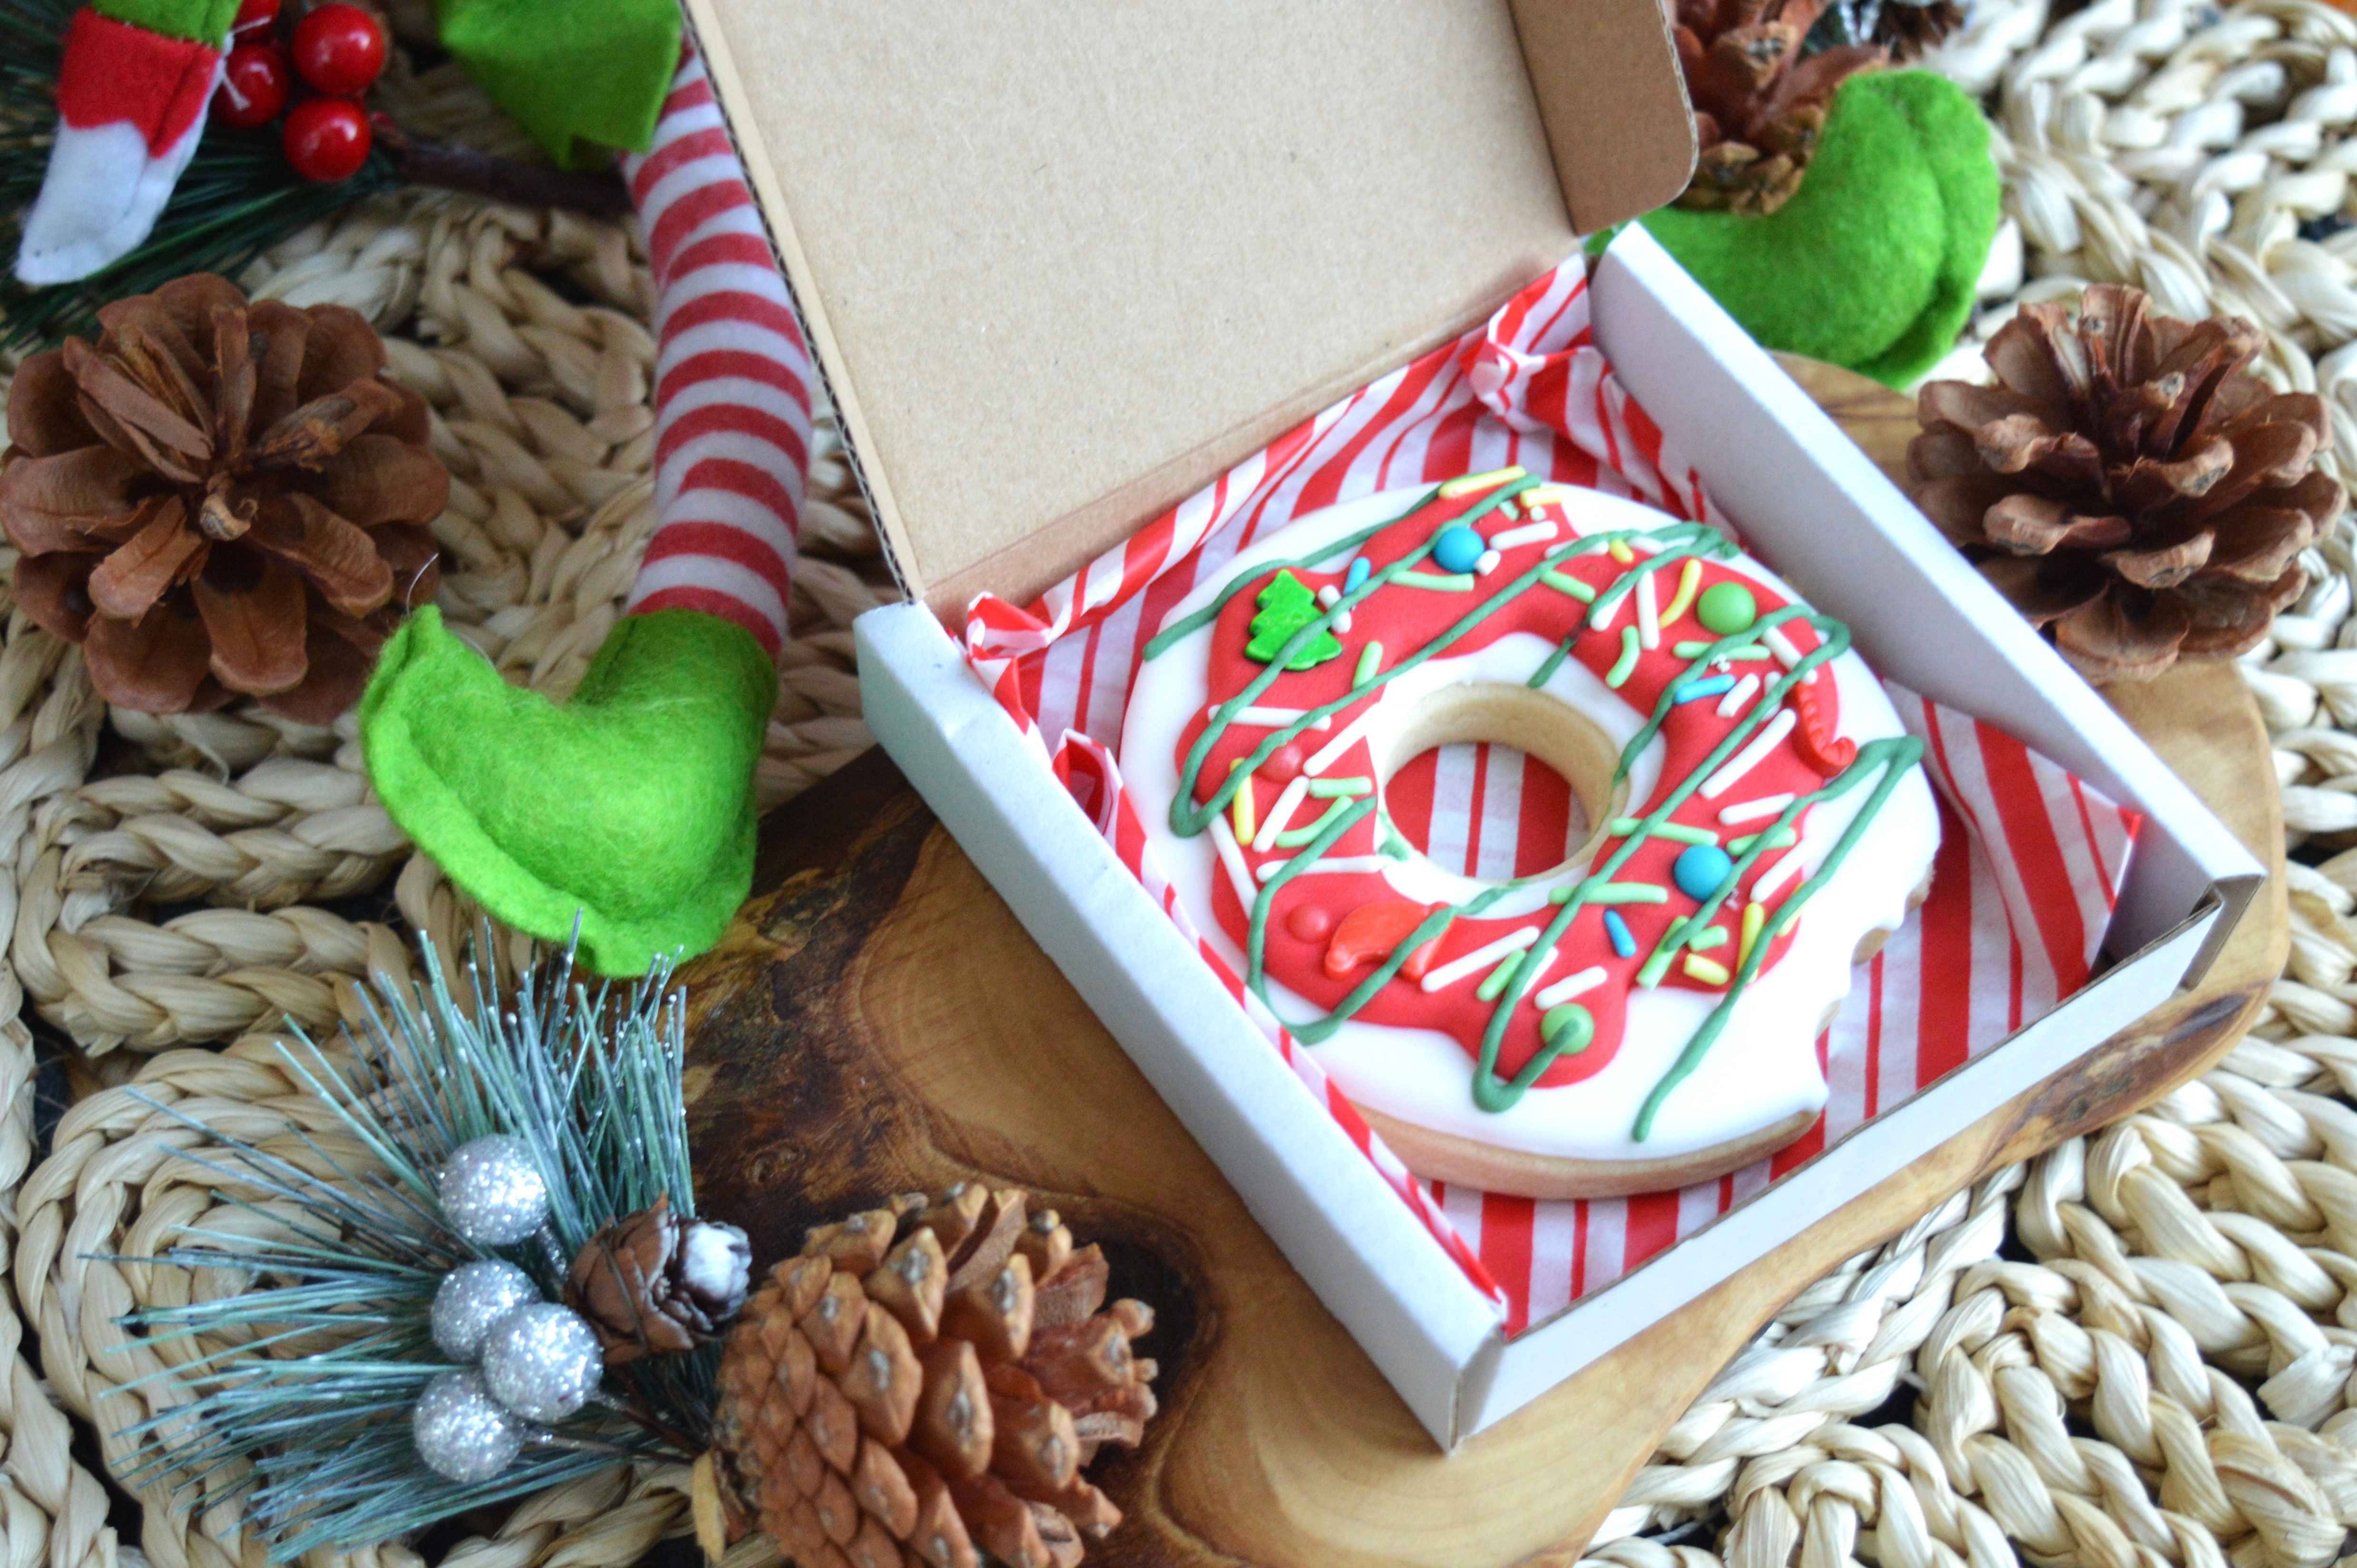 Elf on shelf-Donut biscuits-Christmas biscuits-Sugar Cookies-Iced biscuits-Christmas gift-Elf biscuit-Party favors-Personalized biscuits